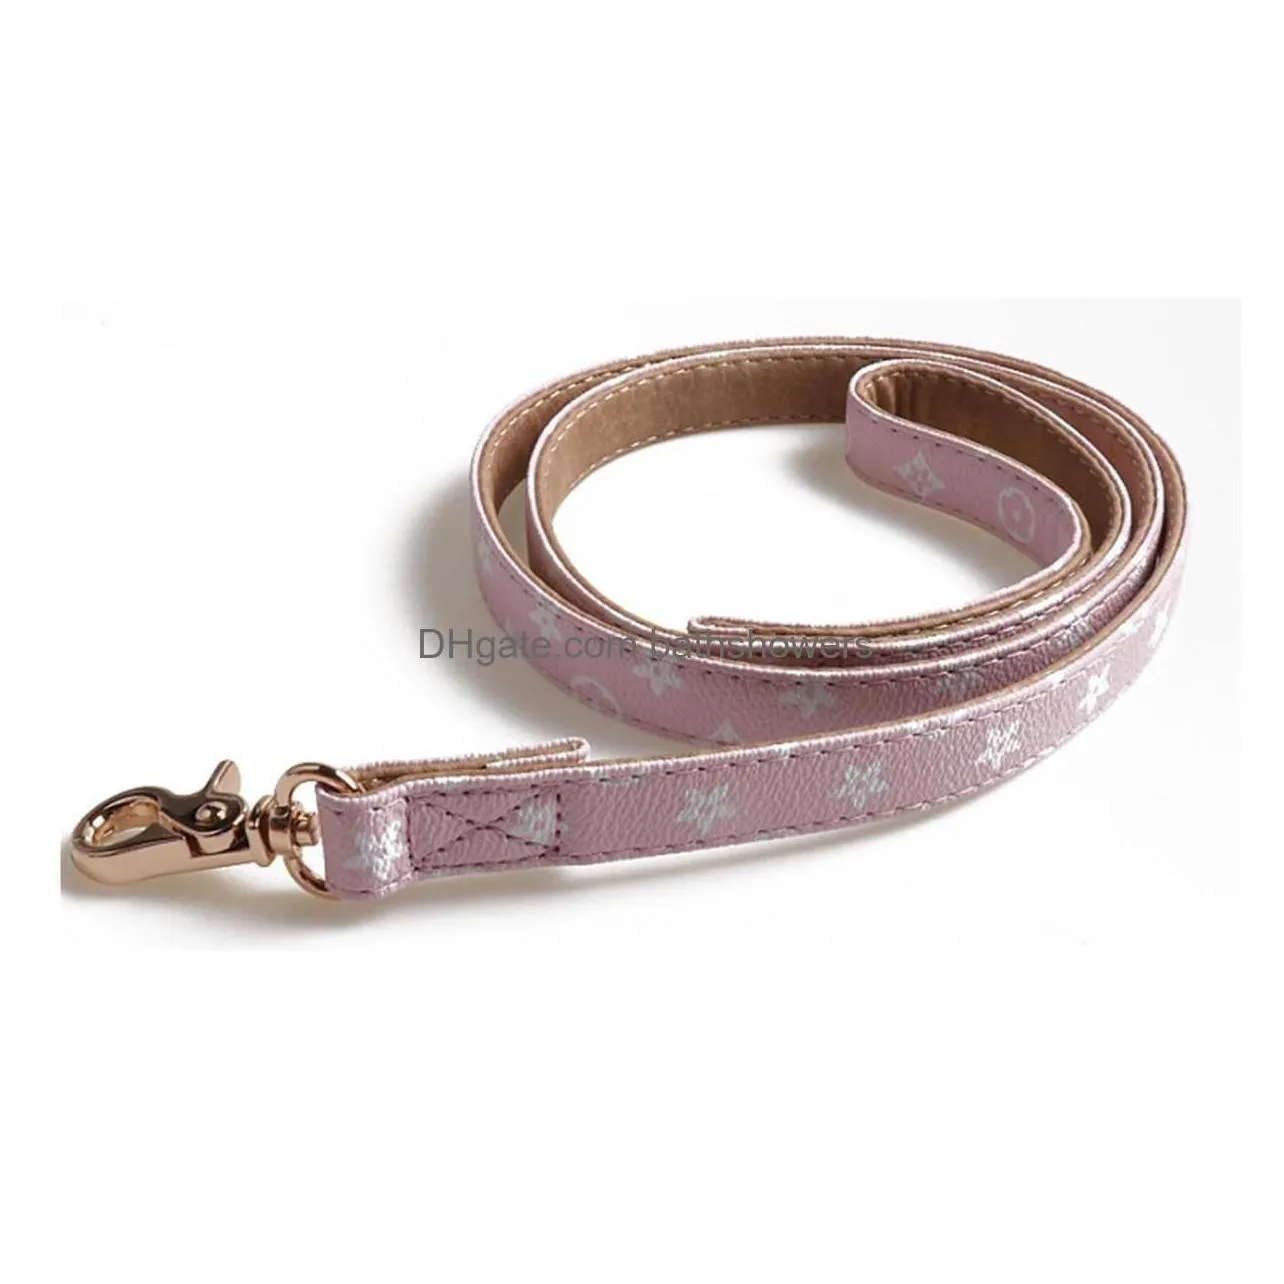 Dog Collars Leashes Dhs Luxury Designer Collar Pattern Pu Leather Pets Adjustable Brand Cat Outdoor Personality Pet Accessories Dr